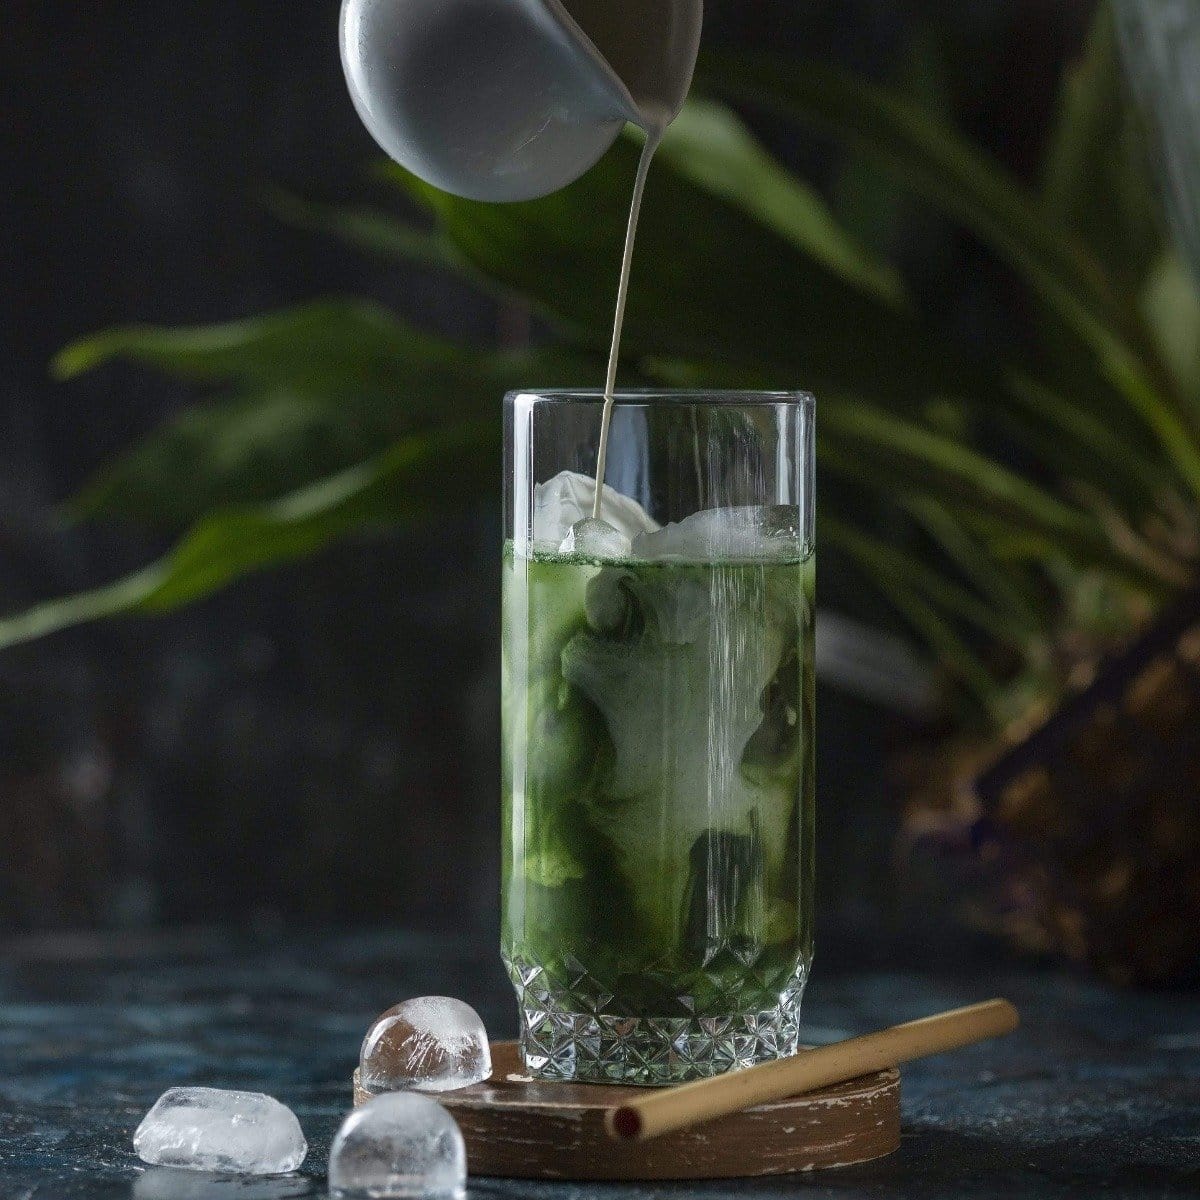 A tall glass filled with a green beverage and ice sits on a wooden coaster. A small pitcher pours a creamy liquid into the glass. A bamboo straw rests beside the coaster. The background features green foliage and a dark, moody ambiance, perfect for savoring Organic Ceremonial Matcha 700 from Club Magic Hour.